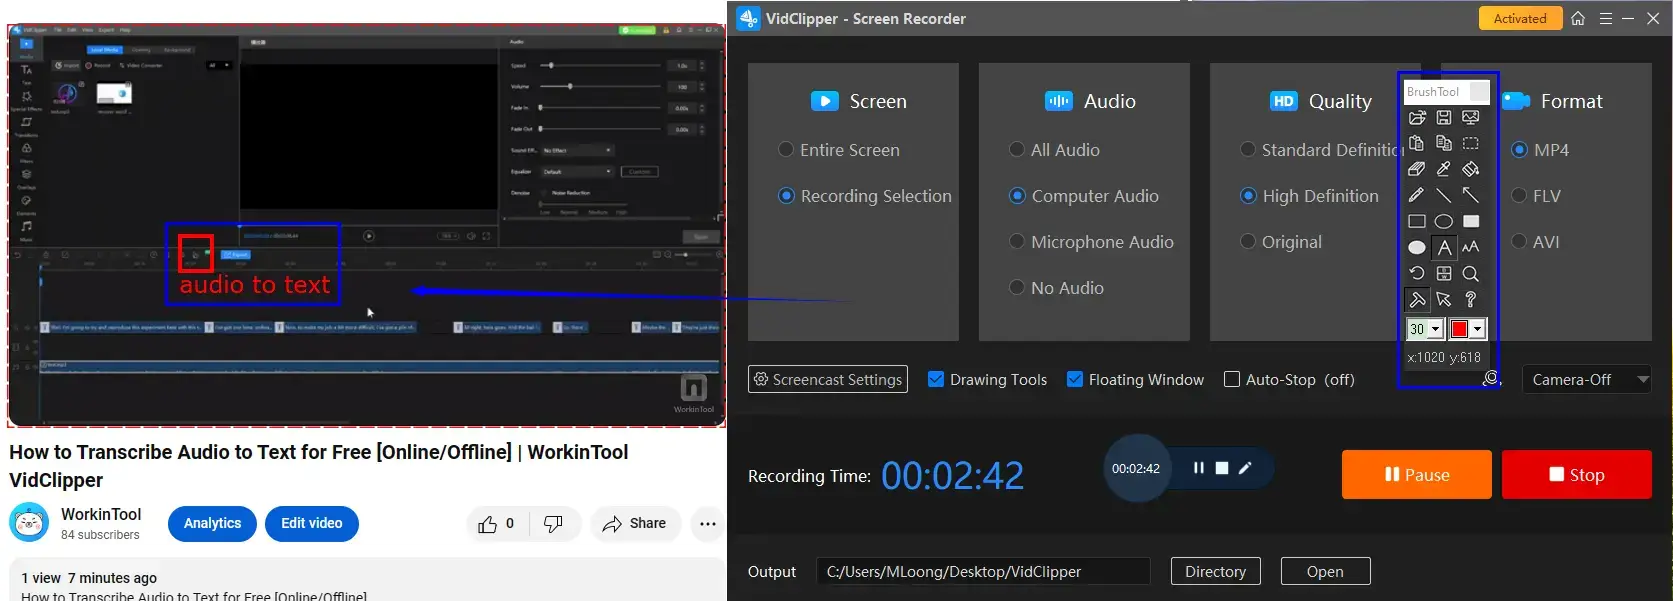 how to record high quality videos on windows with workintool capture screen recorder drawing tool